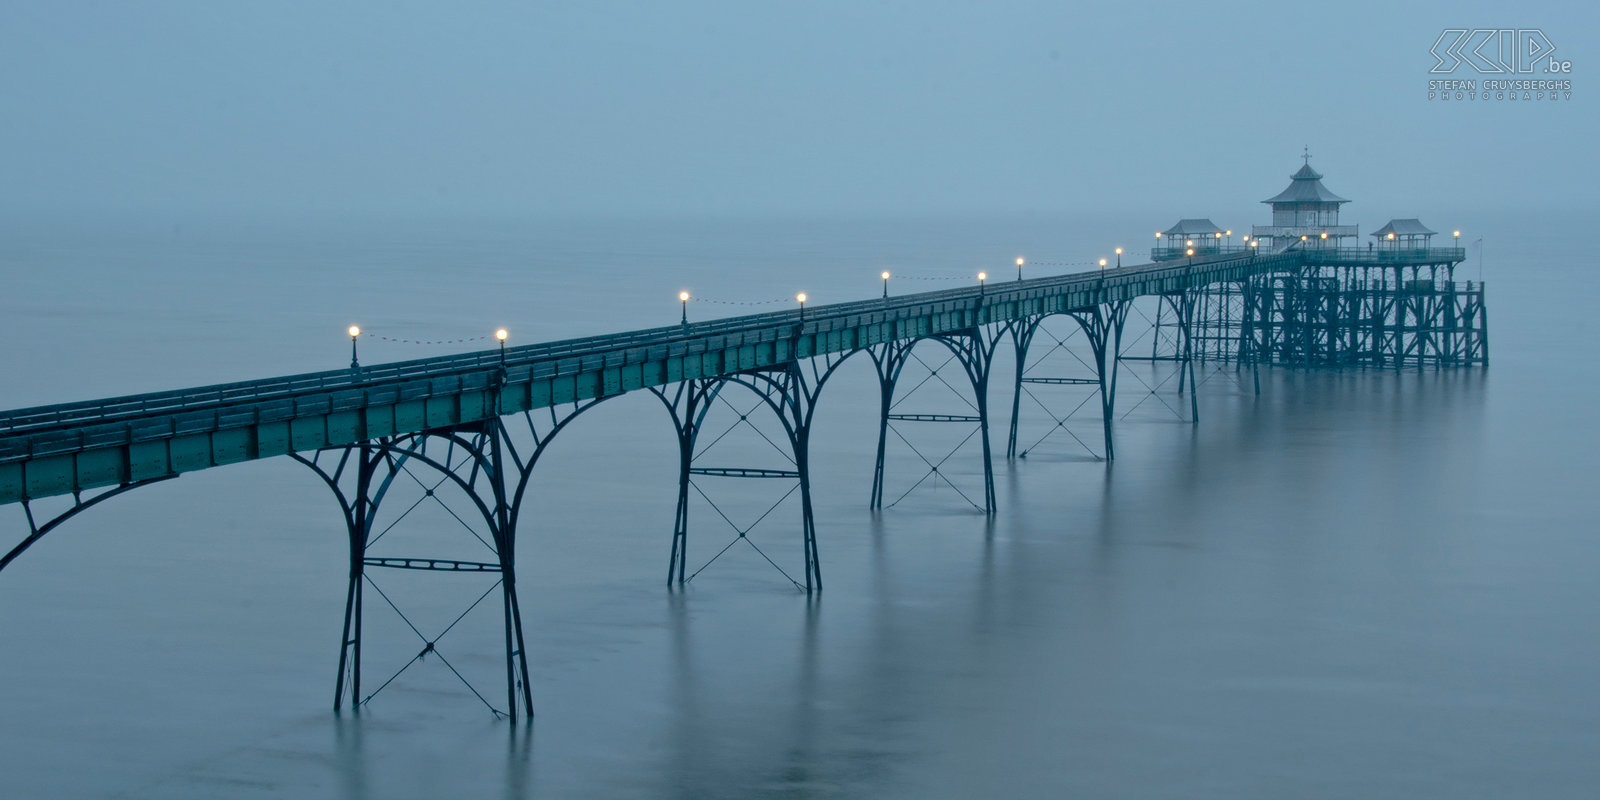 Clevedon - Pier Clevedon Pier (Somerset) on a misty and rainy evening. This beautiful pier which was built in 1869 is one of the finest surviving examples of the Victorian architecture. Stefan Cruysberghs